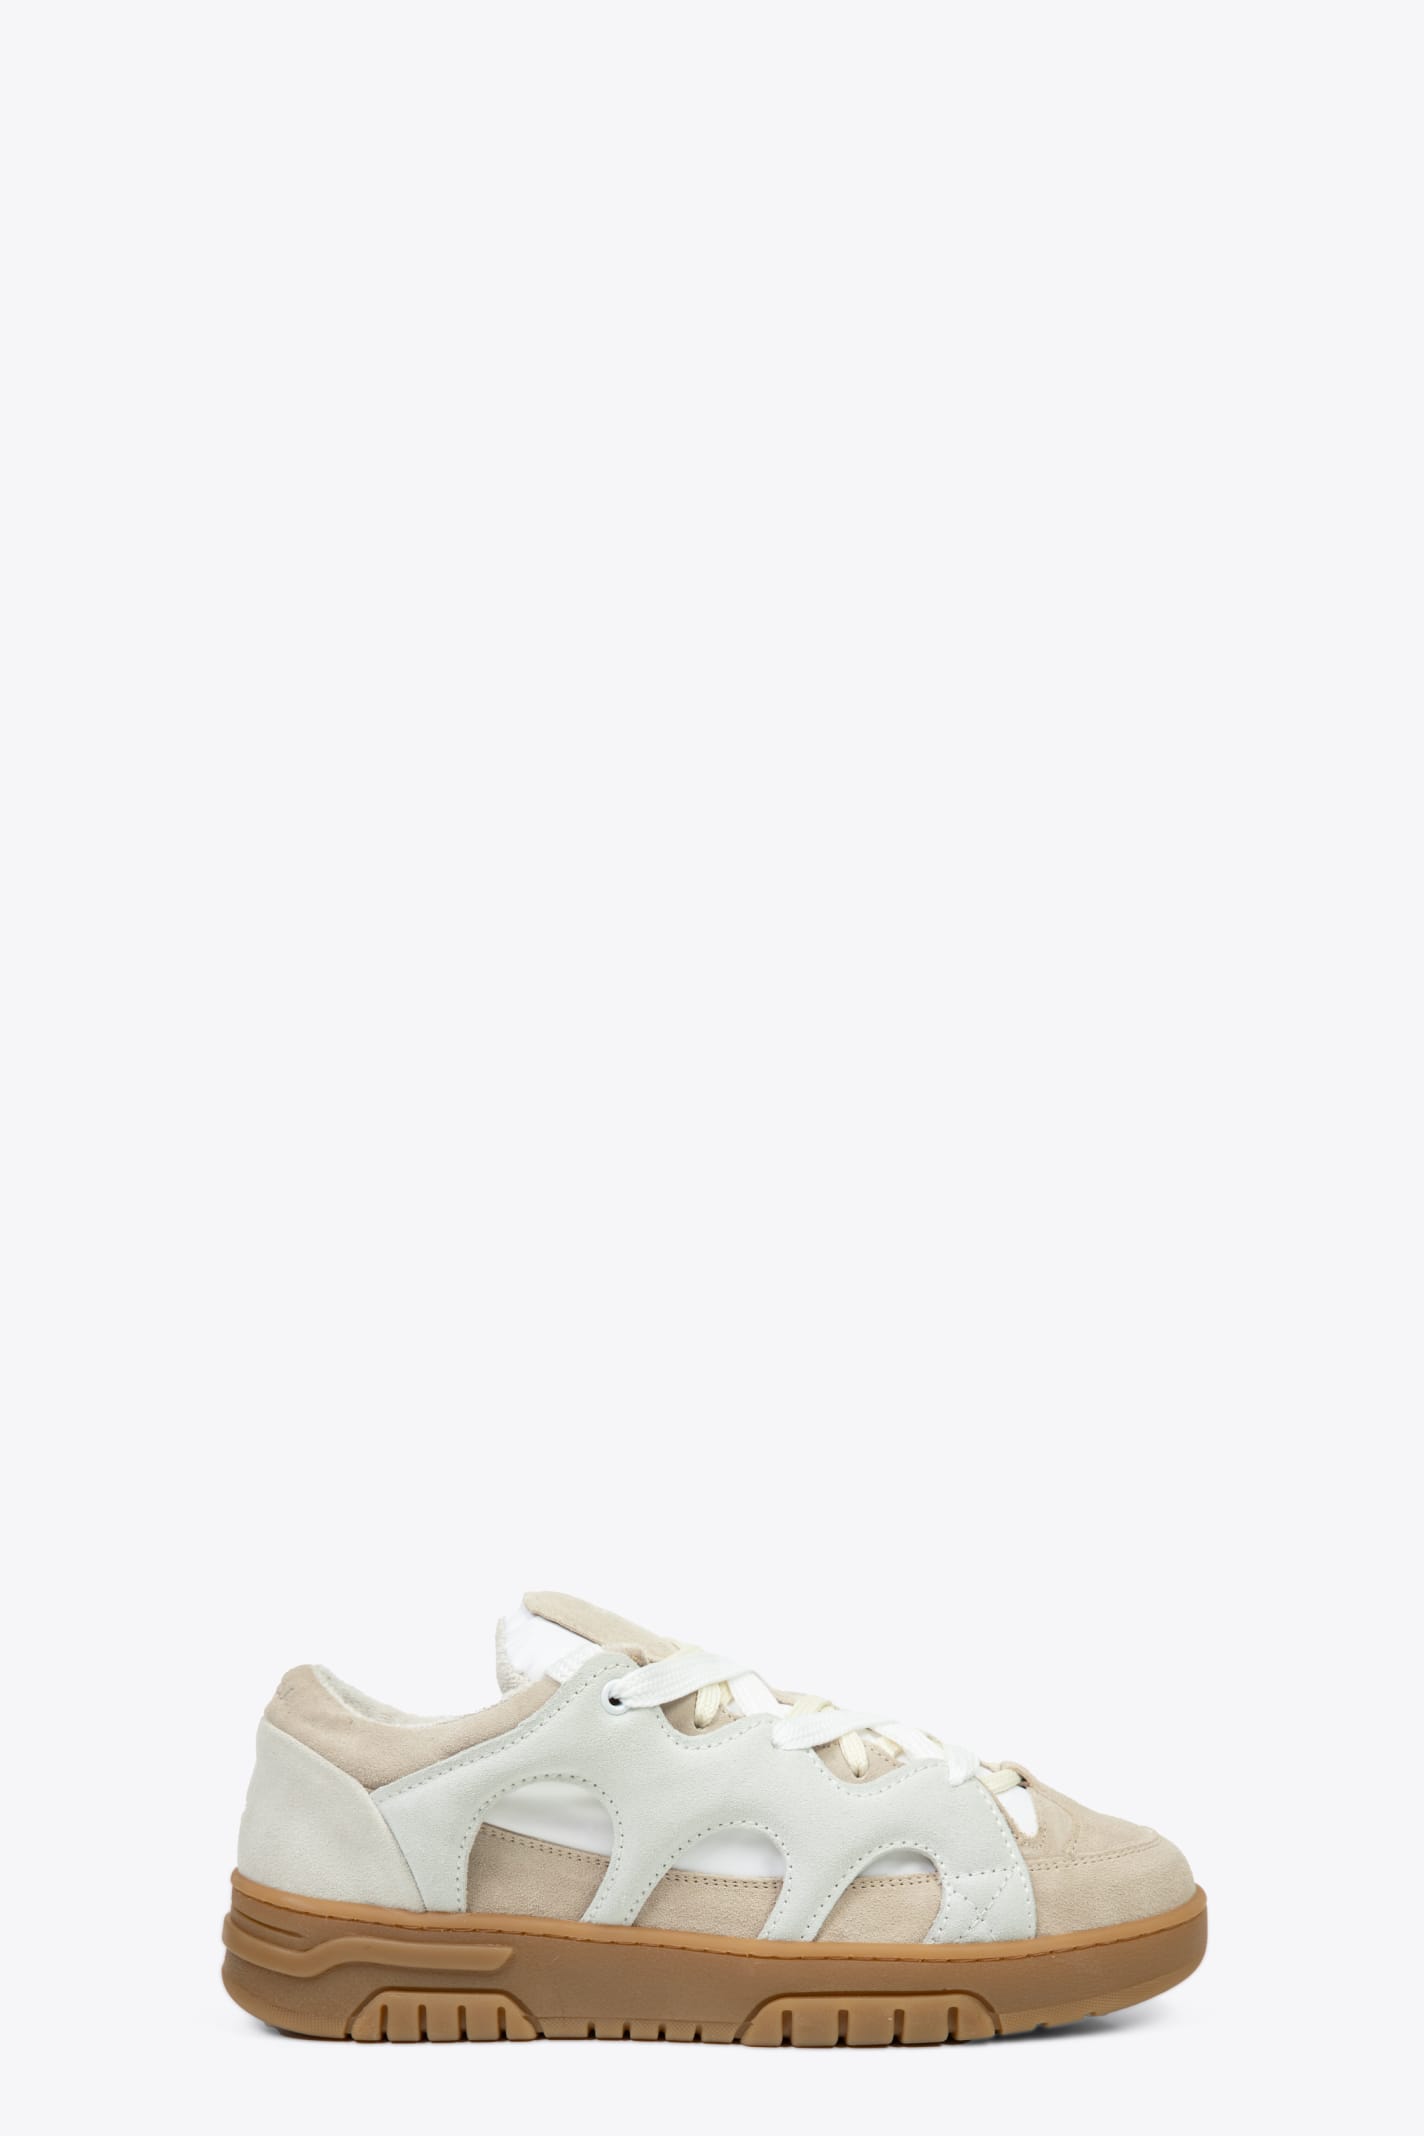 Paura Tr - Suede - New Bomber White Nylon And Beige Suede Low Sneaker In Crema/bianco